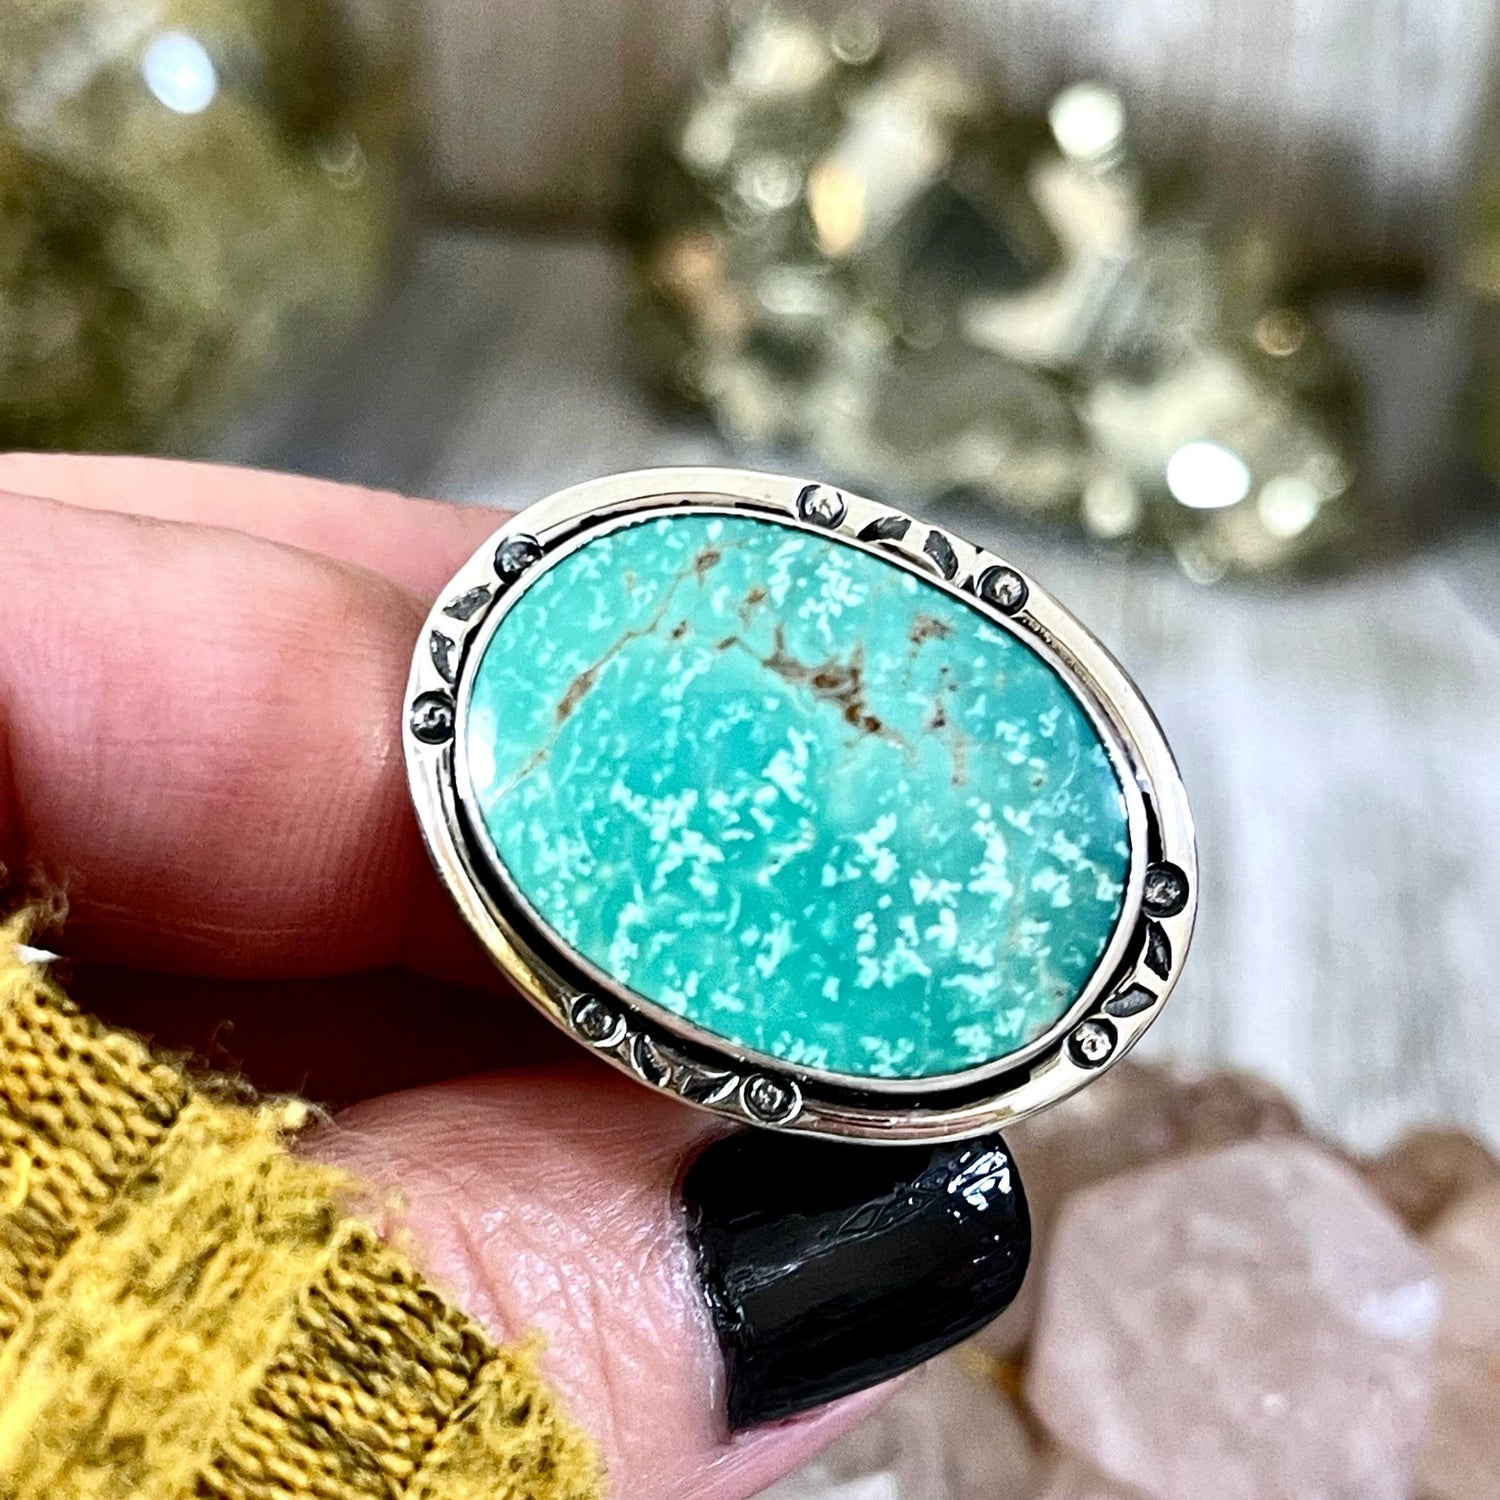 Size 8.5 Stunning Royston Turquoise Statement Ring Set in Sterling Silver / Curated by FOXLARK Collection